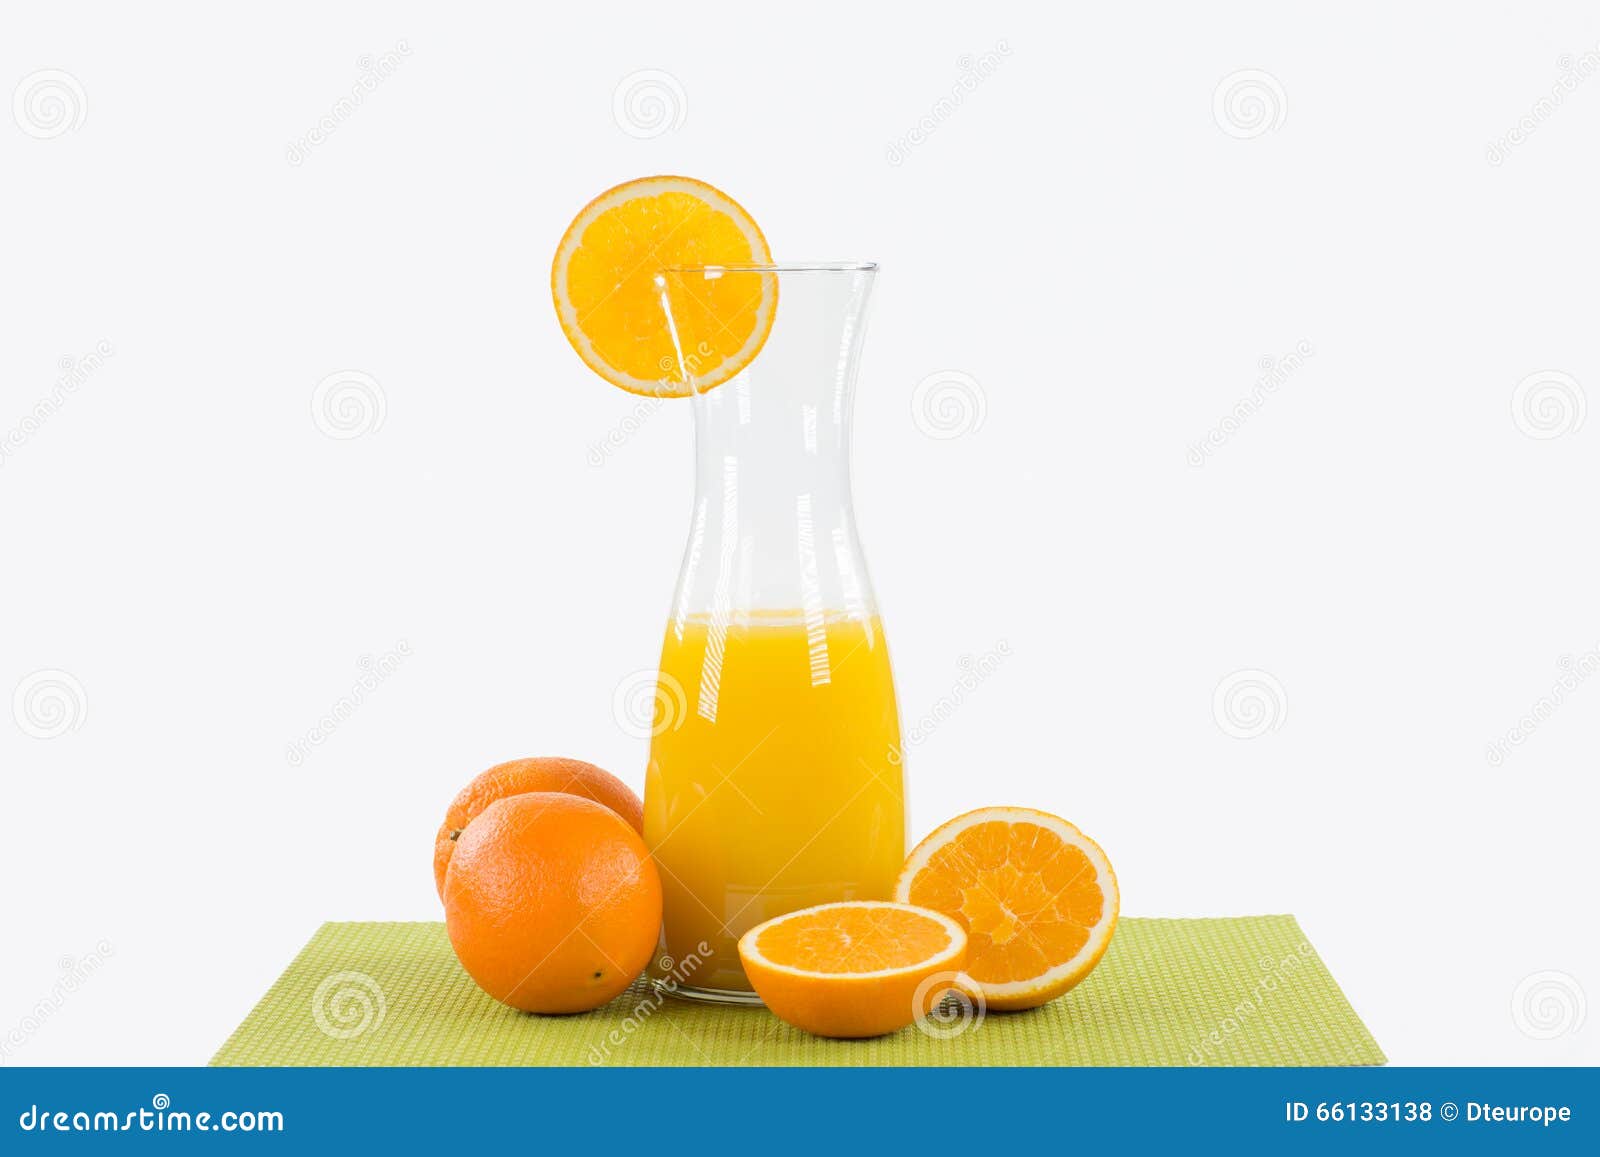 Glass Full Of Orange Juice, Carafe With Fresh Juice, Straw And Fresh  Oranges In The Background On Wooden Table Stock Photo, Picture and Royalty  Free Image. Image 105485816.